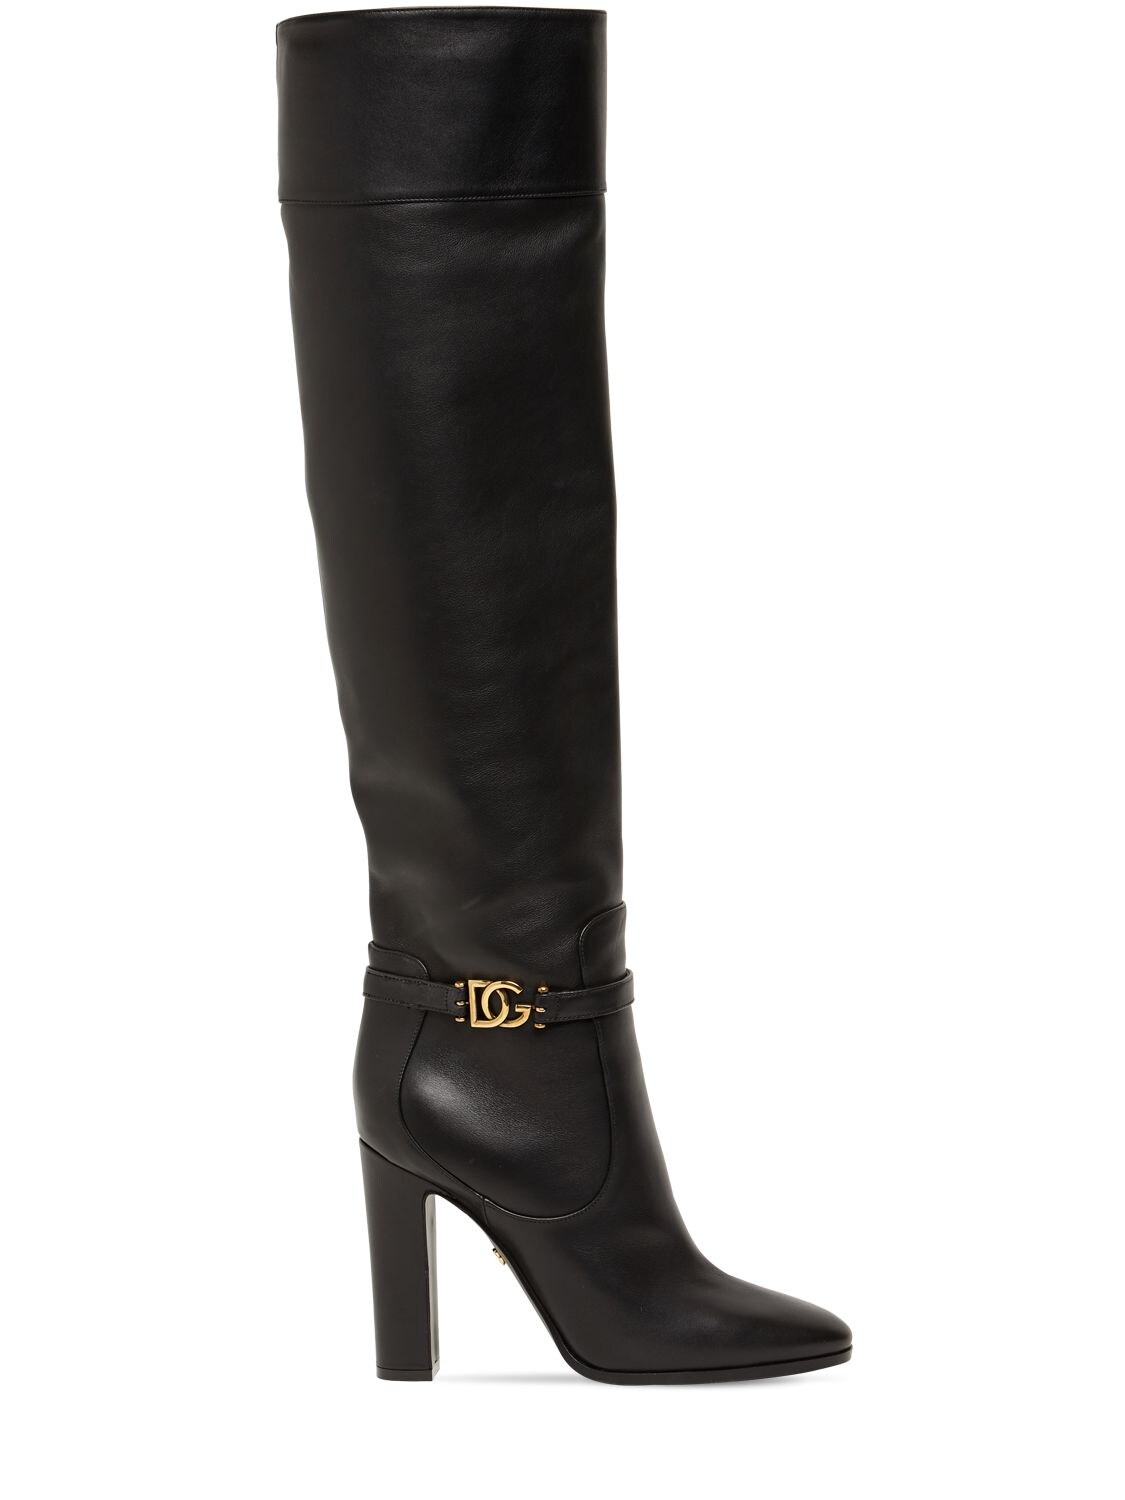 Dolce & Gabbana 105mm Leather Tall Boots In Black | ModeSens